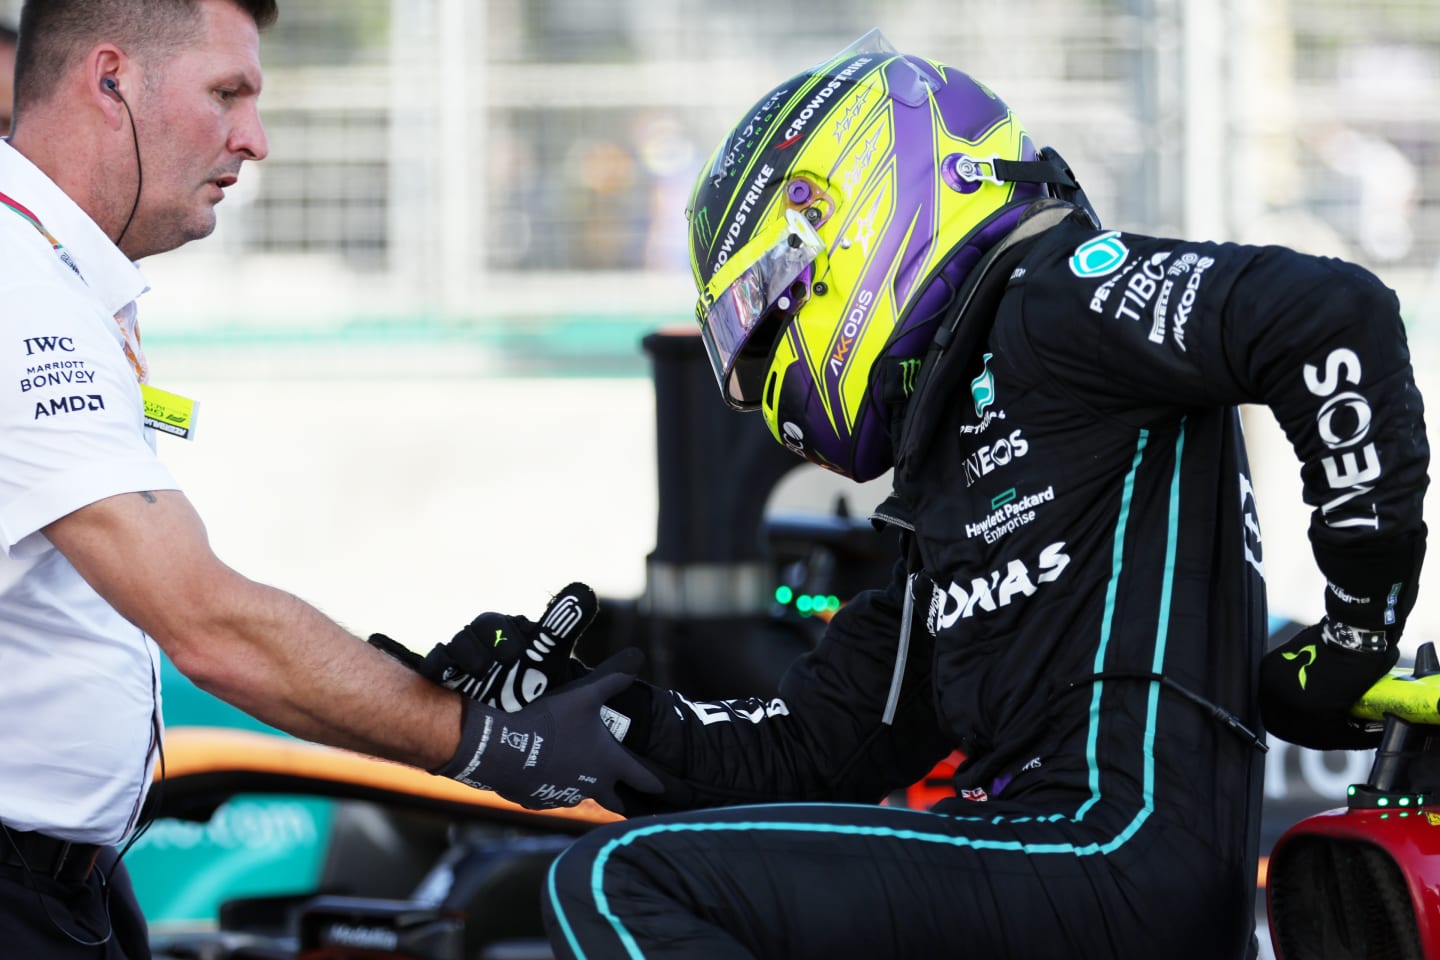 BAKU, AZERBAIJAN - JUNE 12: Fourth placed Lewis Hamilton of Great Britain and Mercedes is assisted from his car after complaining of pain during the F1 Grand Prix of Azerbaijan at Baku City Circuit on June 12, 2022 in Baku, Azerbaijan. (Photo by Bryn Lennon - Formula 1/Formula 1 via Getty Images)